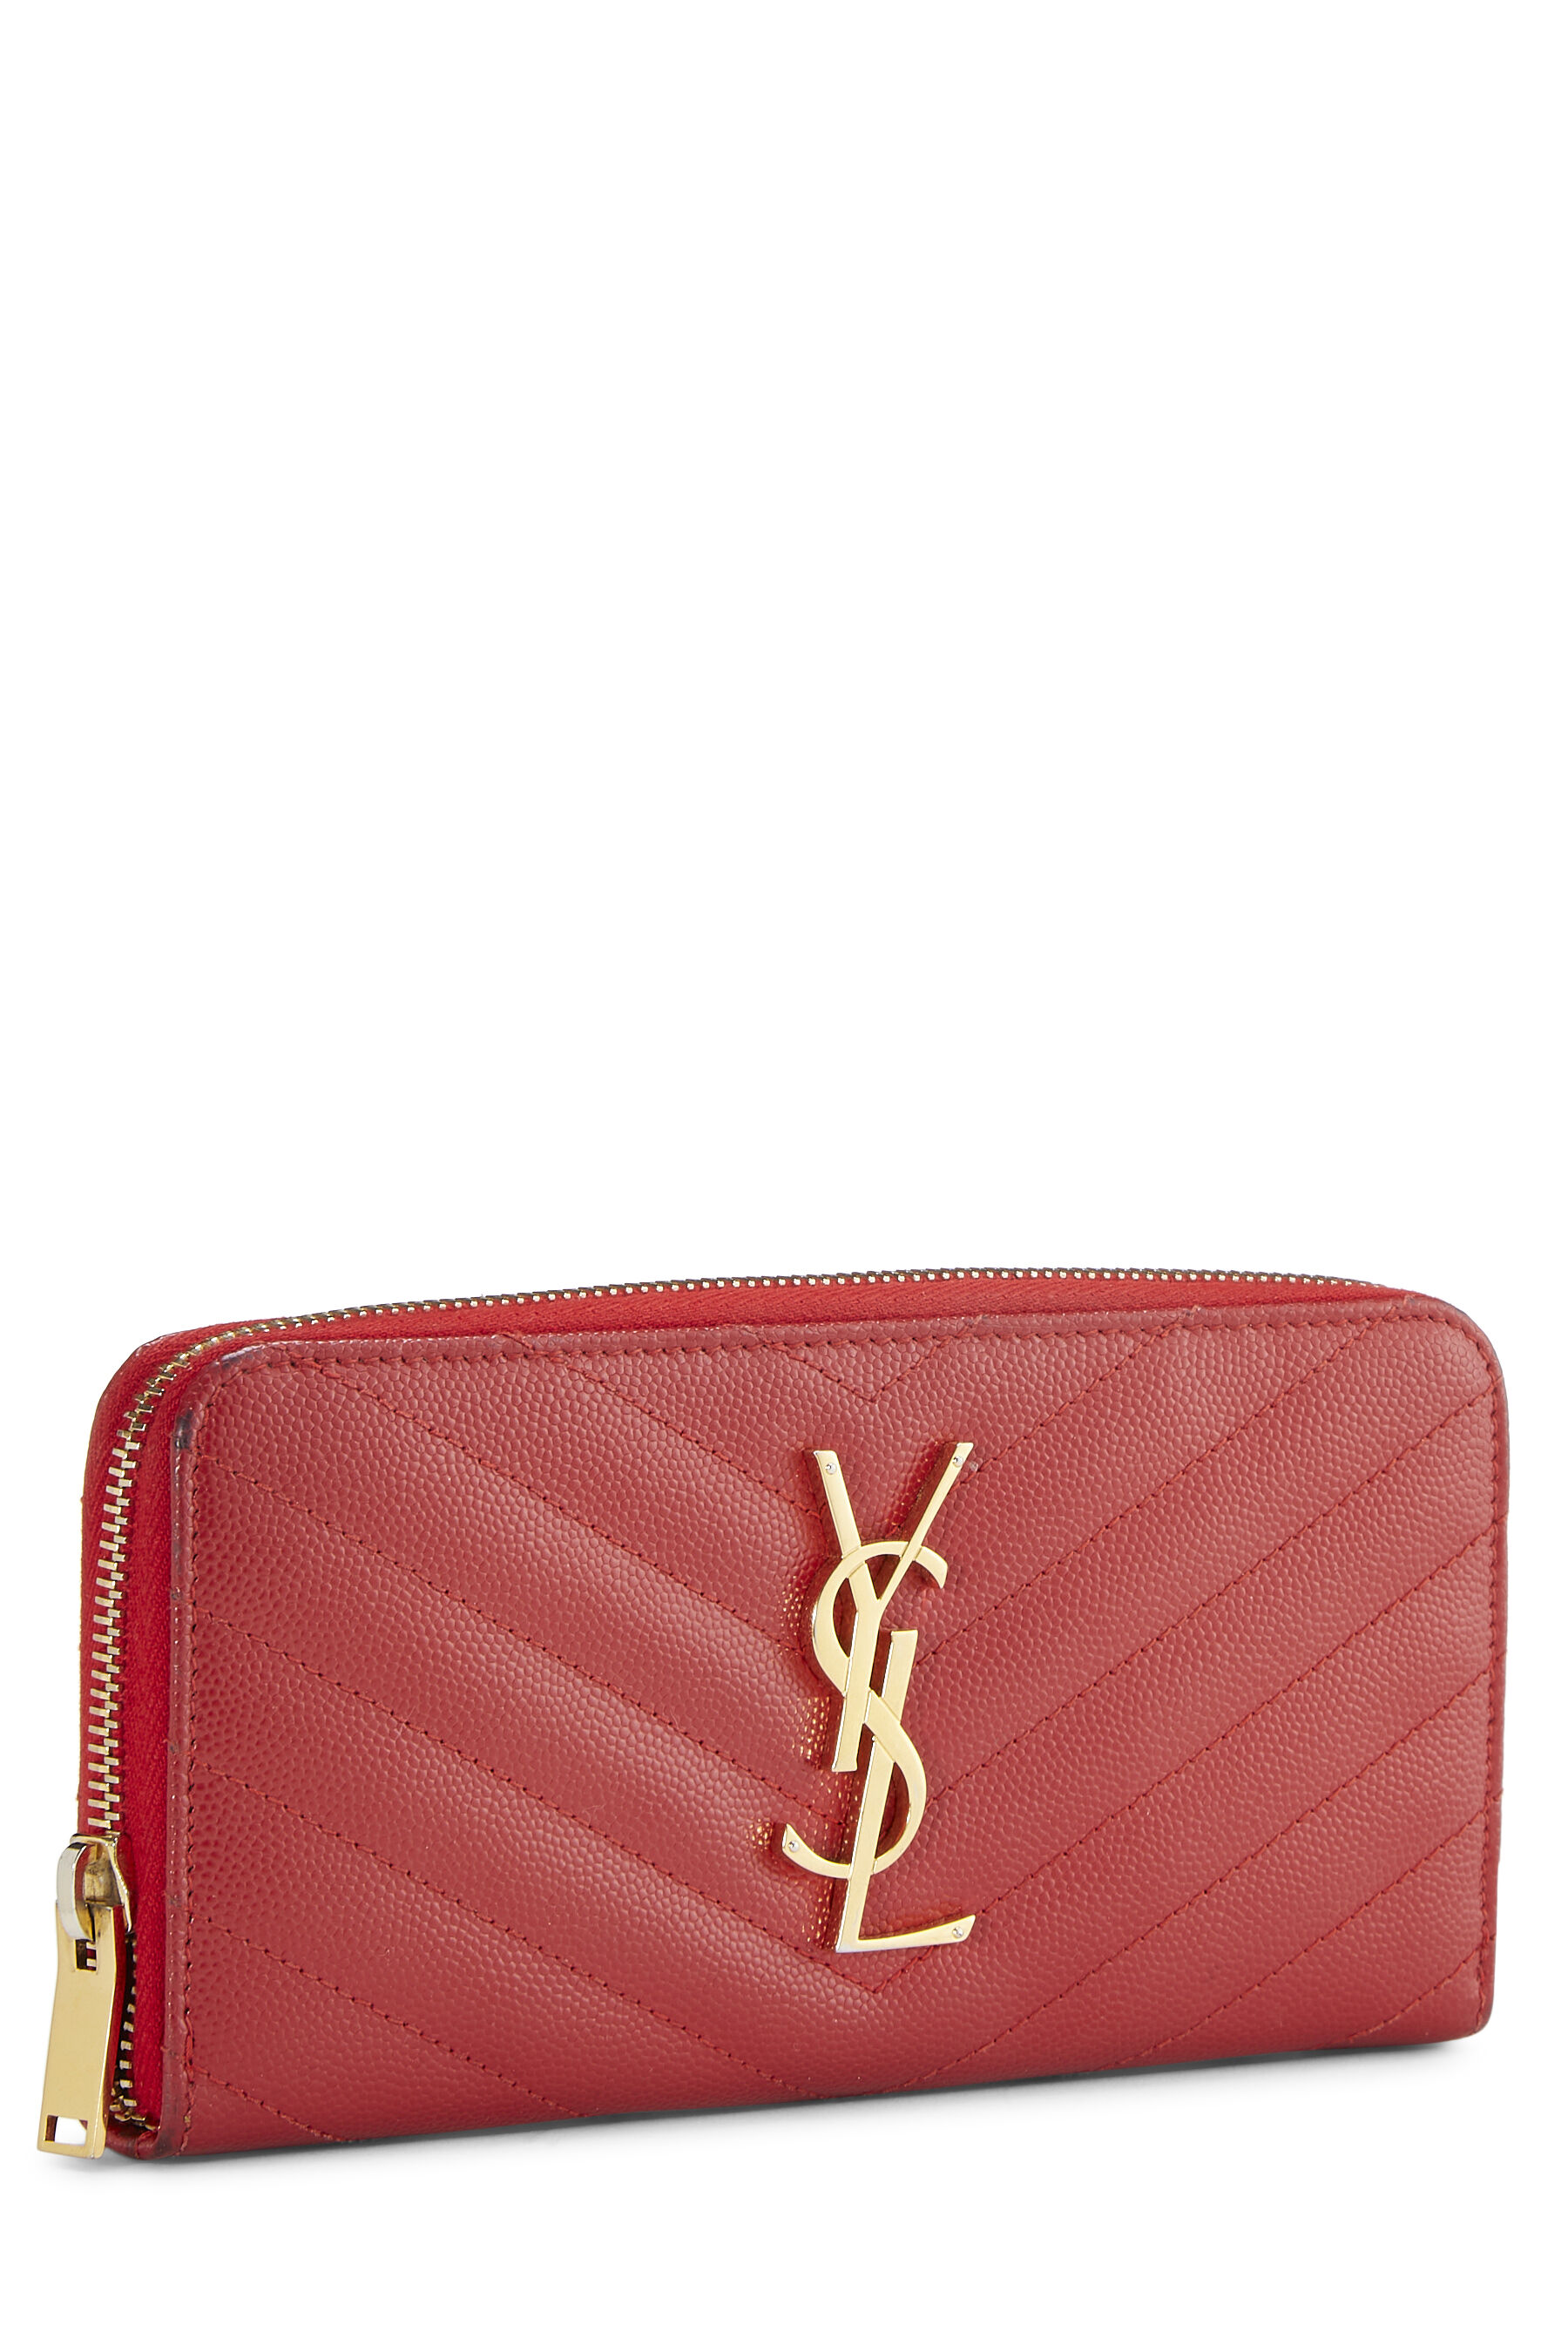 YSL Red Grainy Leather Zip Around Wallet QTADVD18RB003